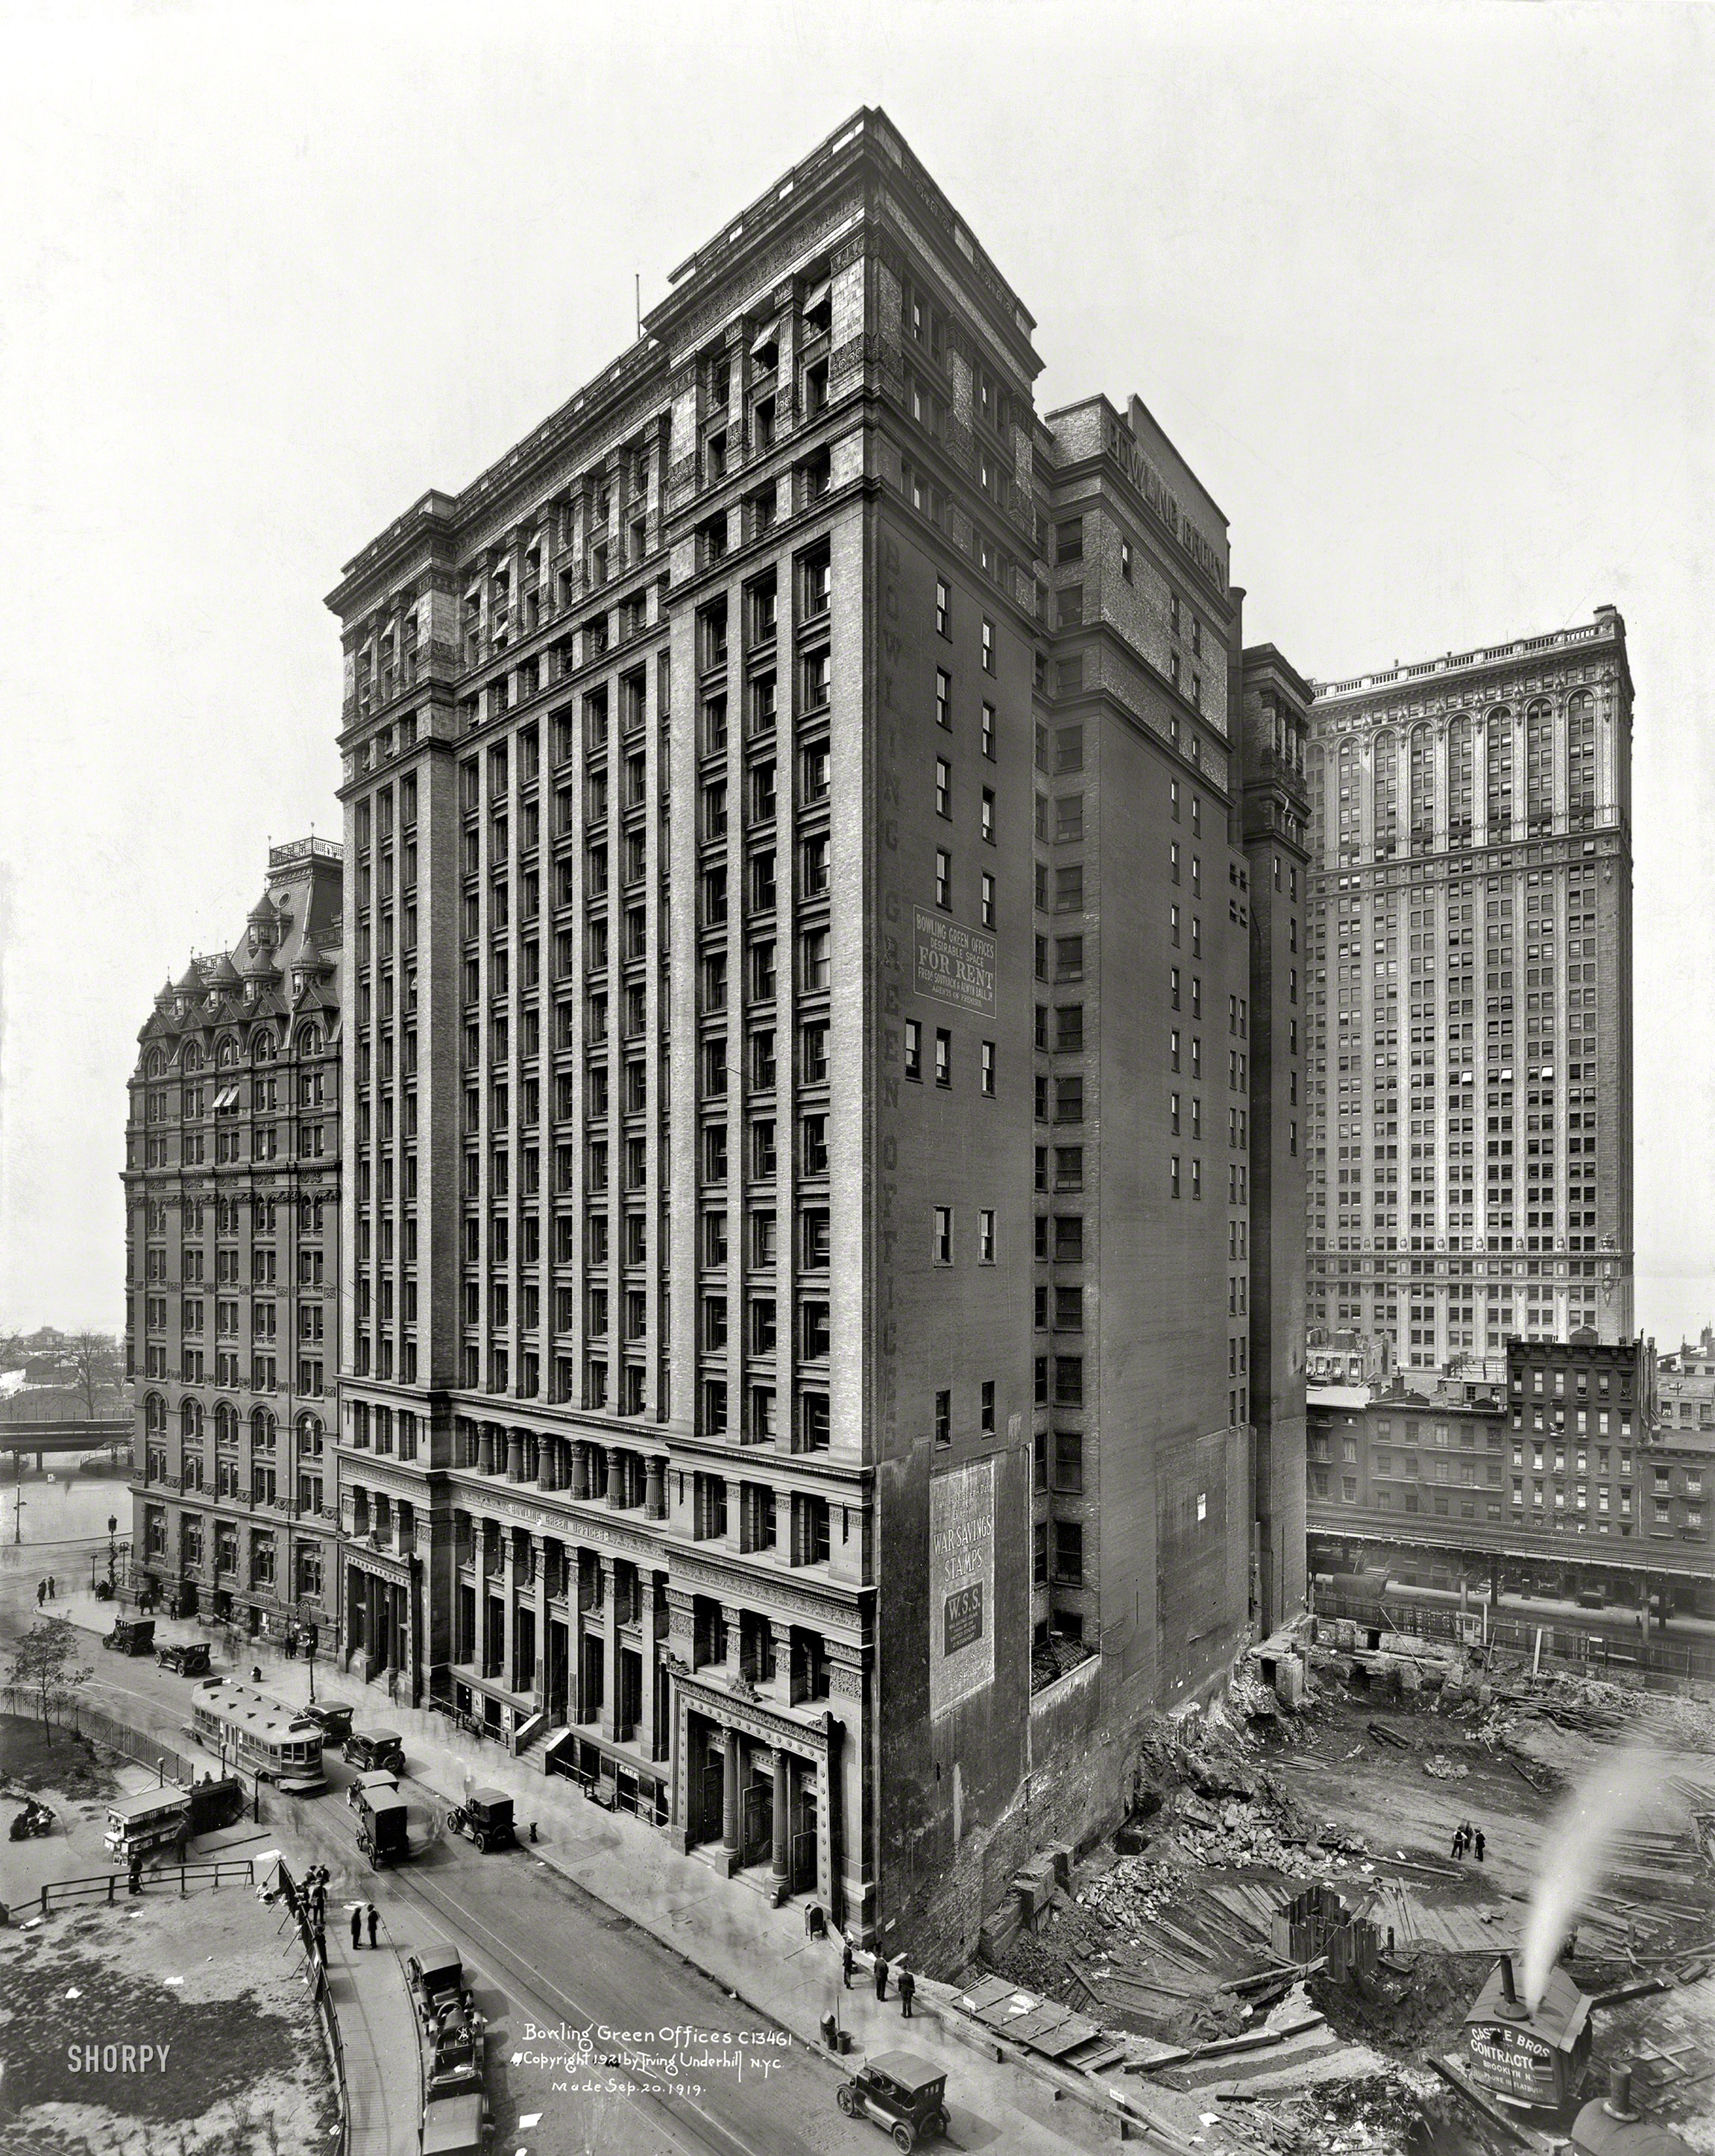 Sept. 20, 1919. "Bowling Green Offices, New York." An interesting view of a construction site next to this early skyscraper, and what might be a new Shorpy record for ghost pedestrians. Photo by Irving Underhill. View full size.